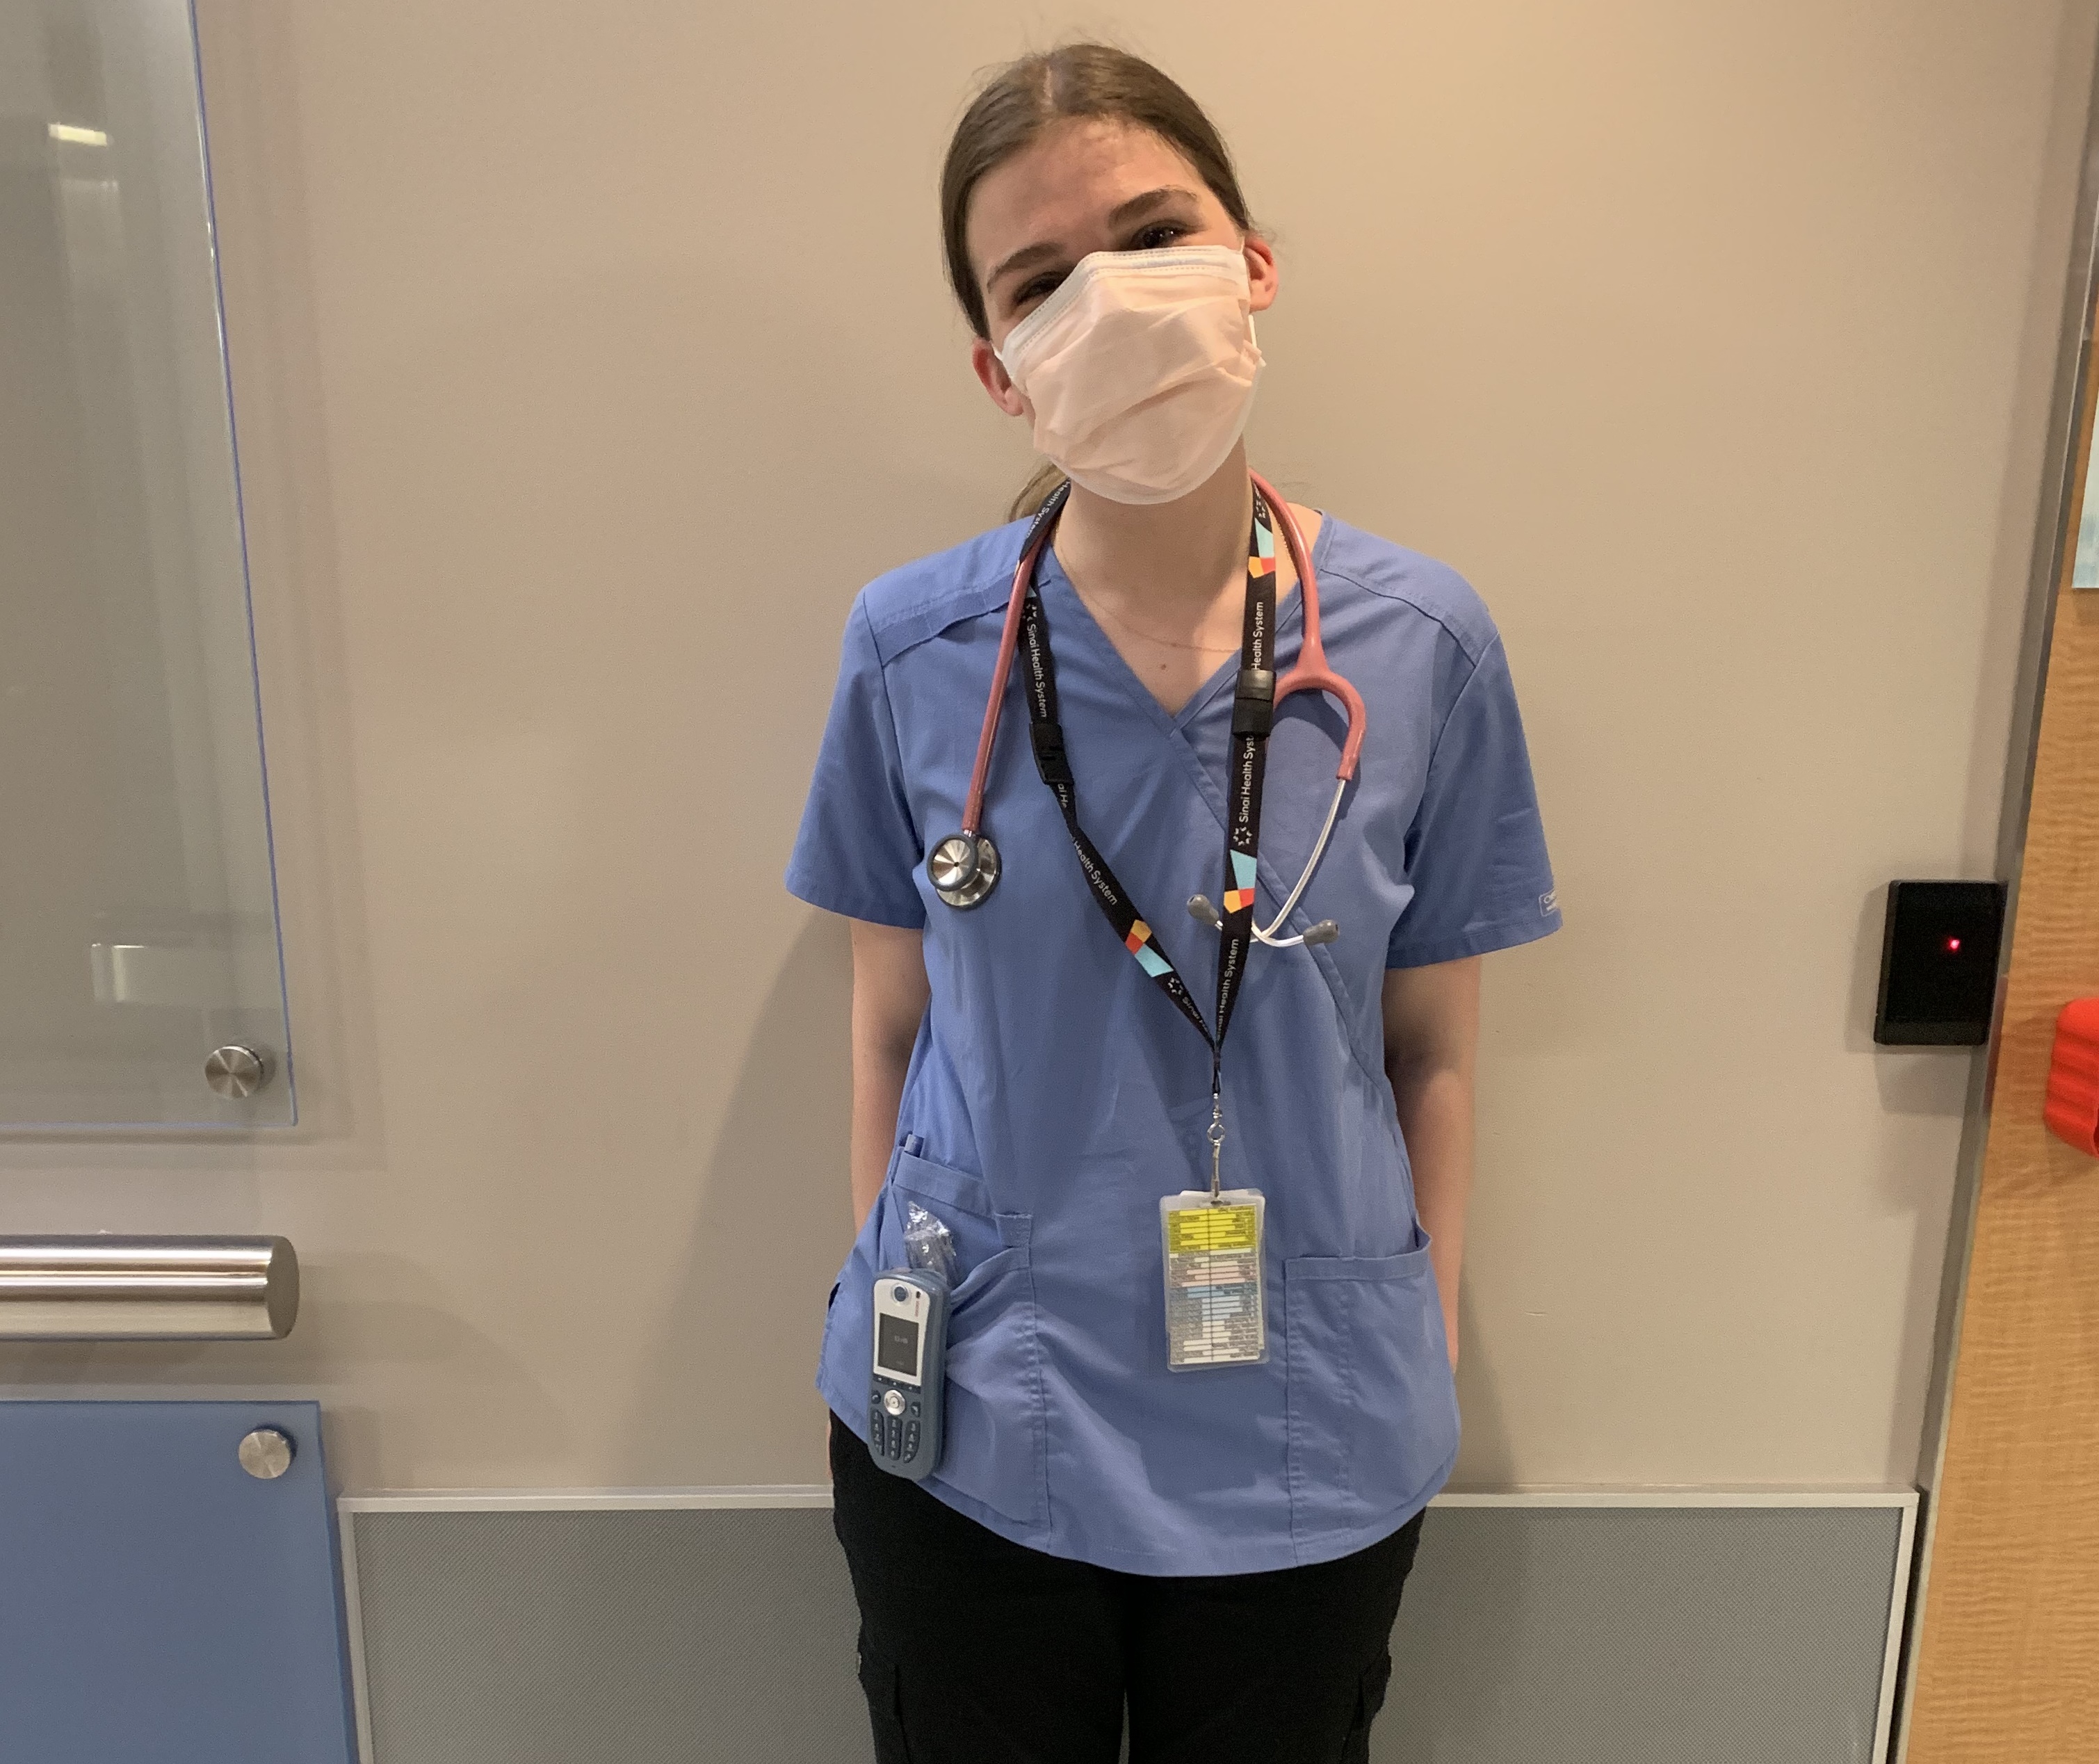 A nurse wearing scrubs and a mask standing in  a hallway, looking at the camera. She is also wearing a stethoscope, lanyard with employee ID badge and pager